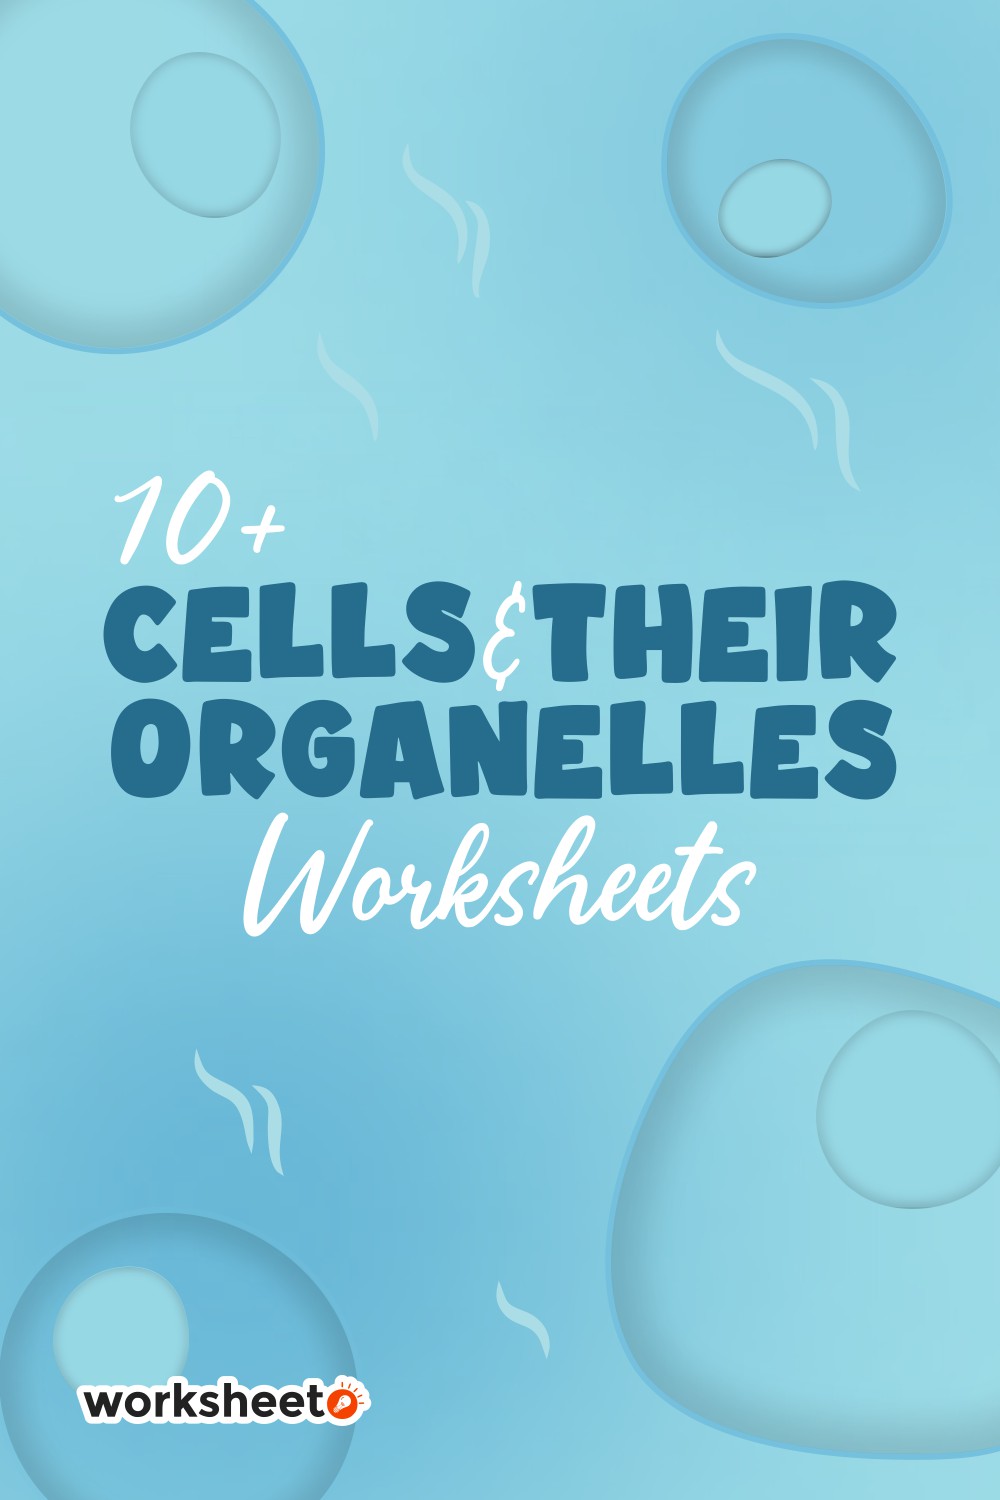 Cells and Their Organelles Worksheet